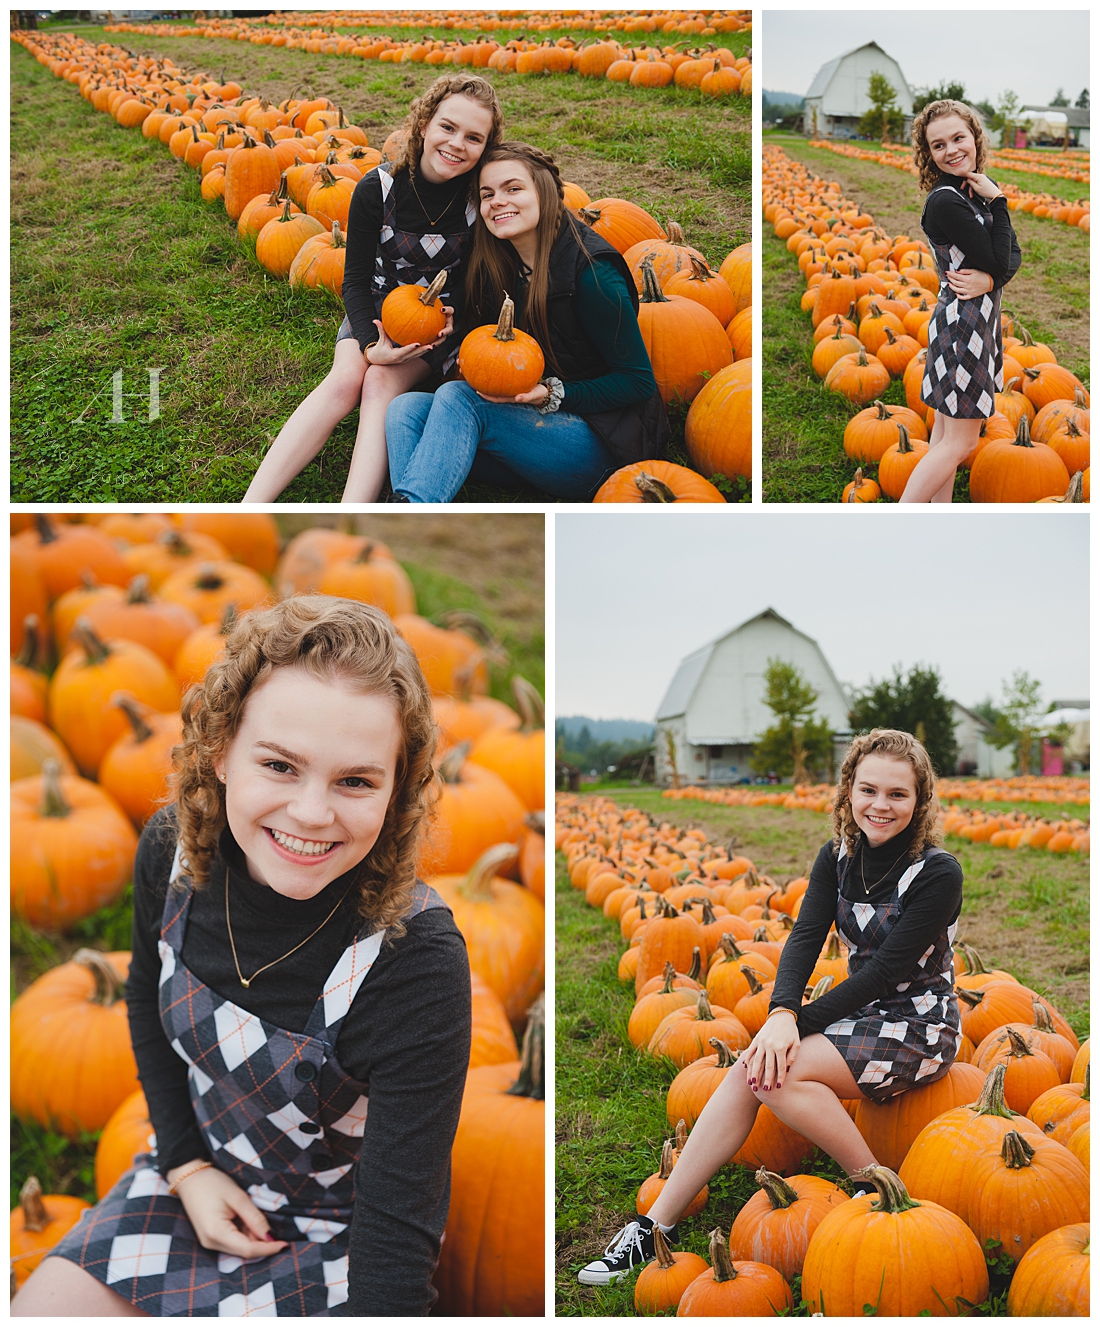 High School Senior Girls Posing with Rows of Pumpkins | Photographed by Tacoma Senior Photographer Amanda Howse